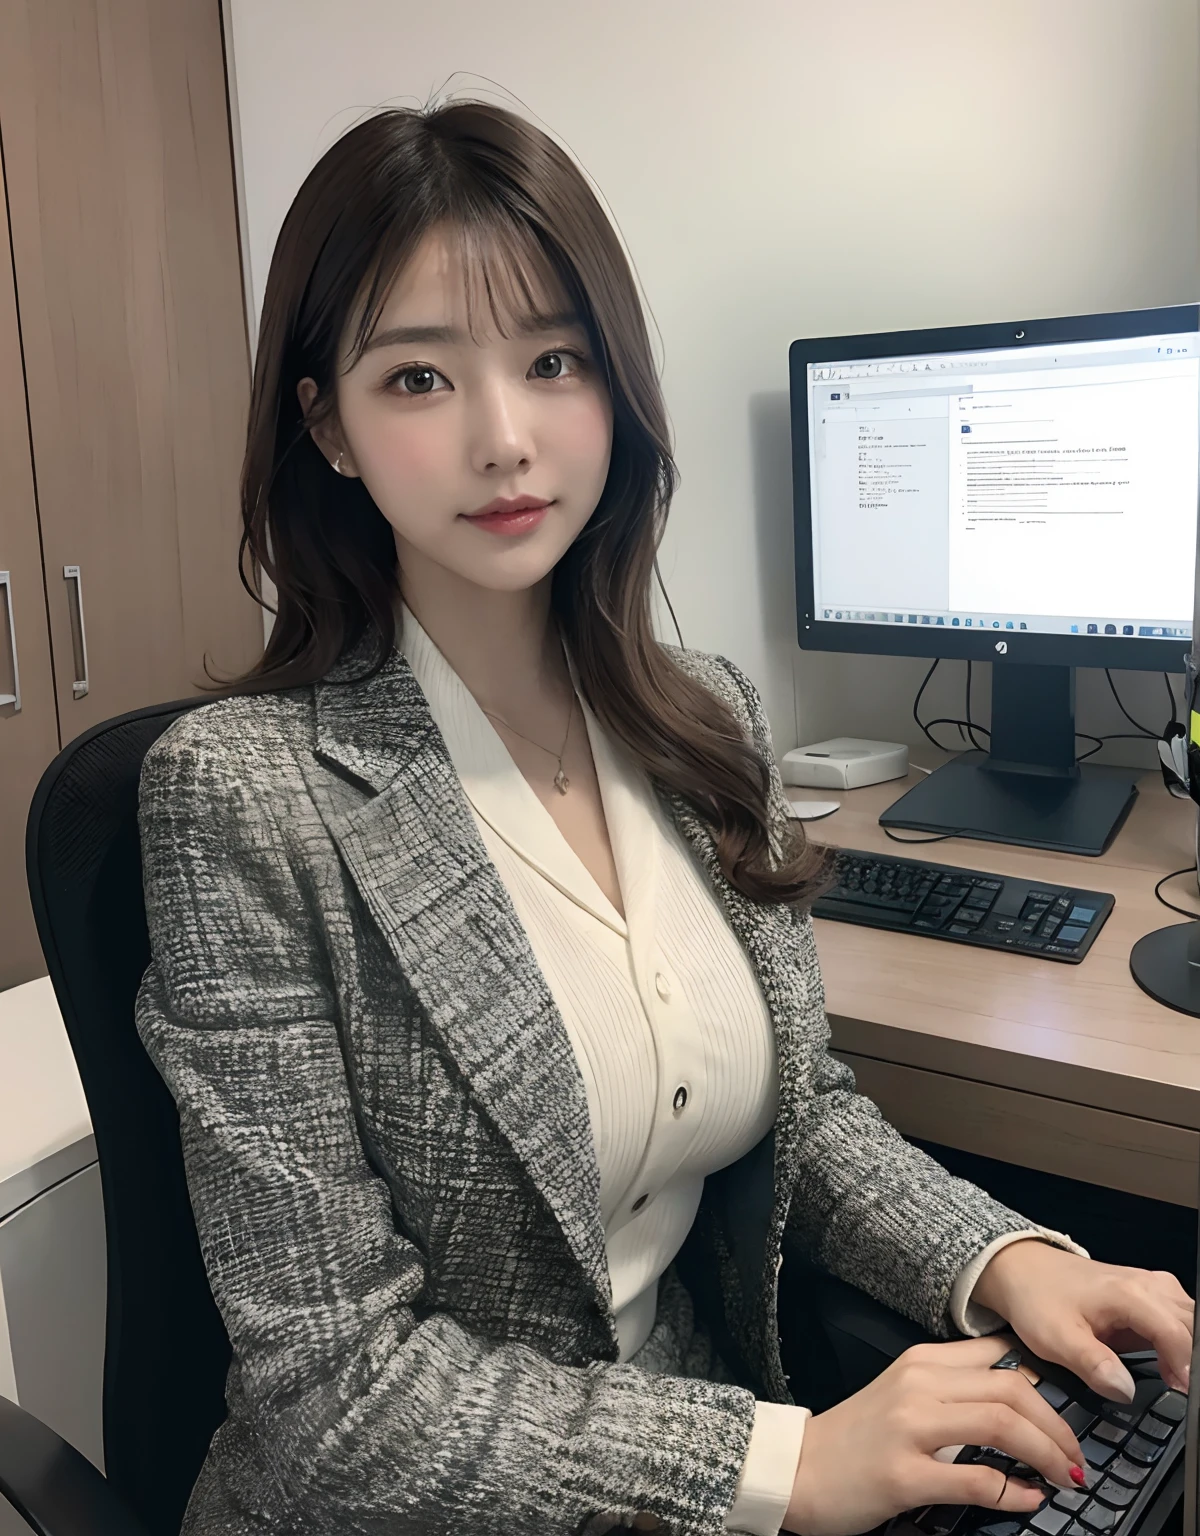 personal computers　office work　lana　valley　A sexy　Age25 Suit